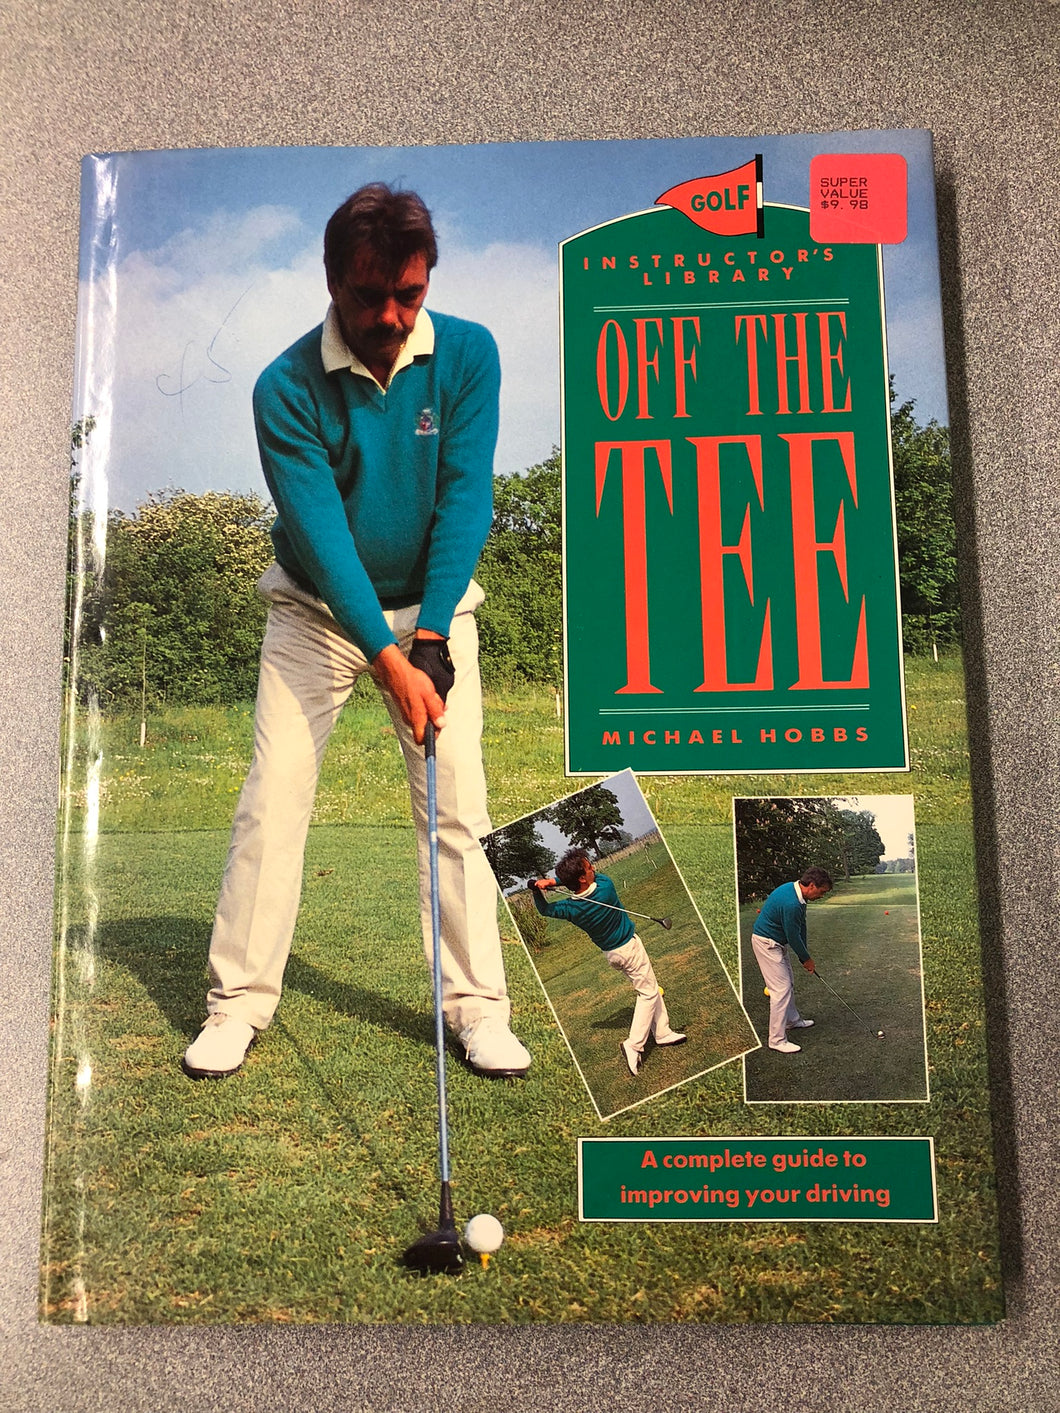 Golf Instructor's Library: Off the Tee: a Complete Guide to Improving Your Driving, Hobbs, Michael [1991] OU 7/22